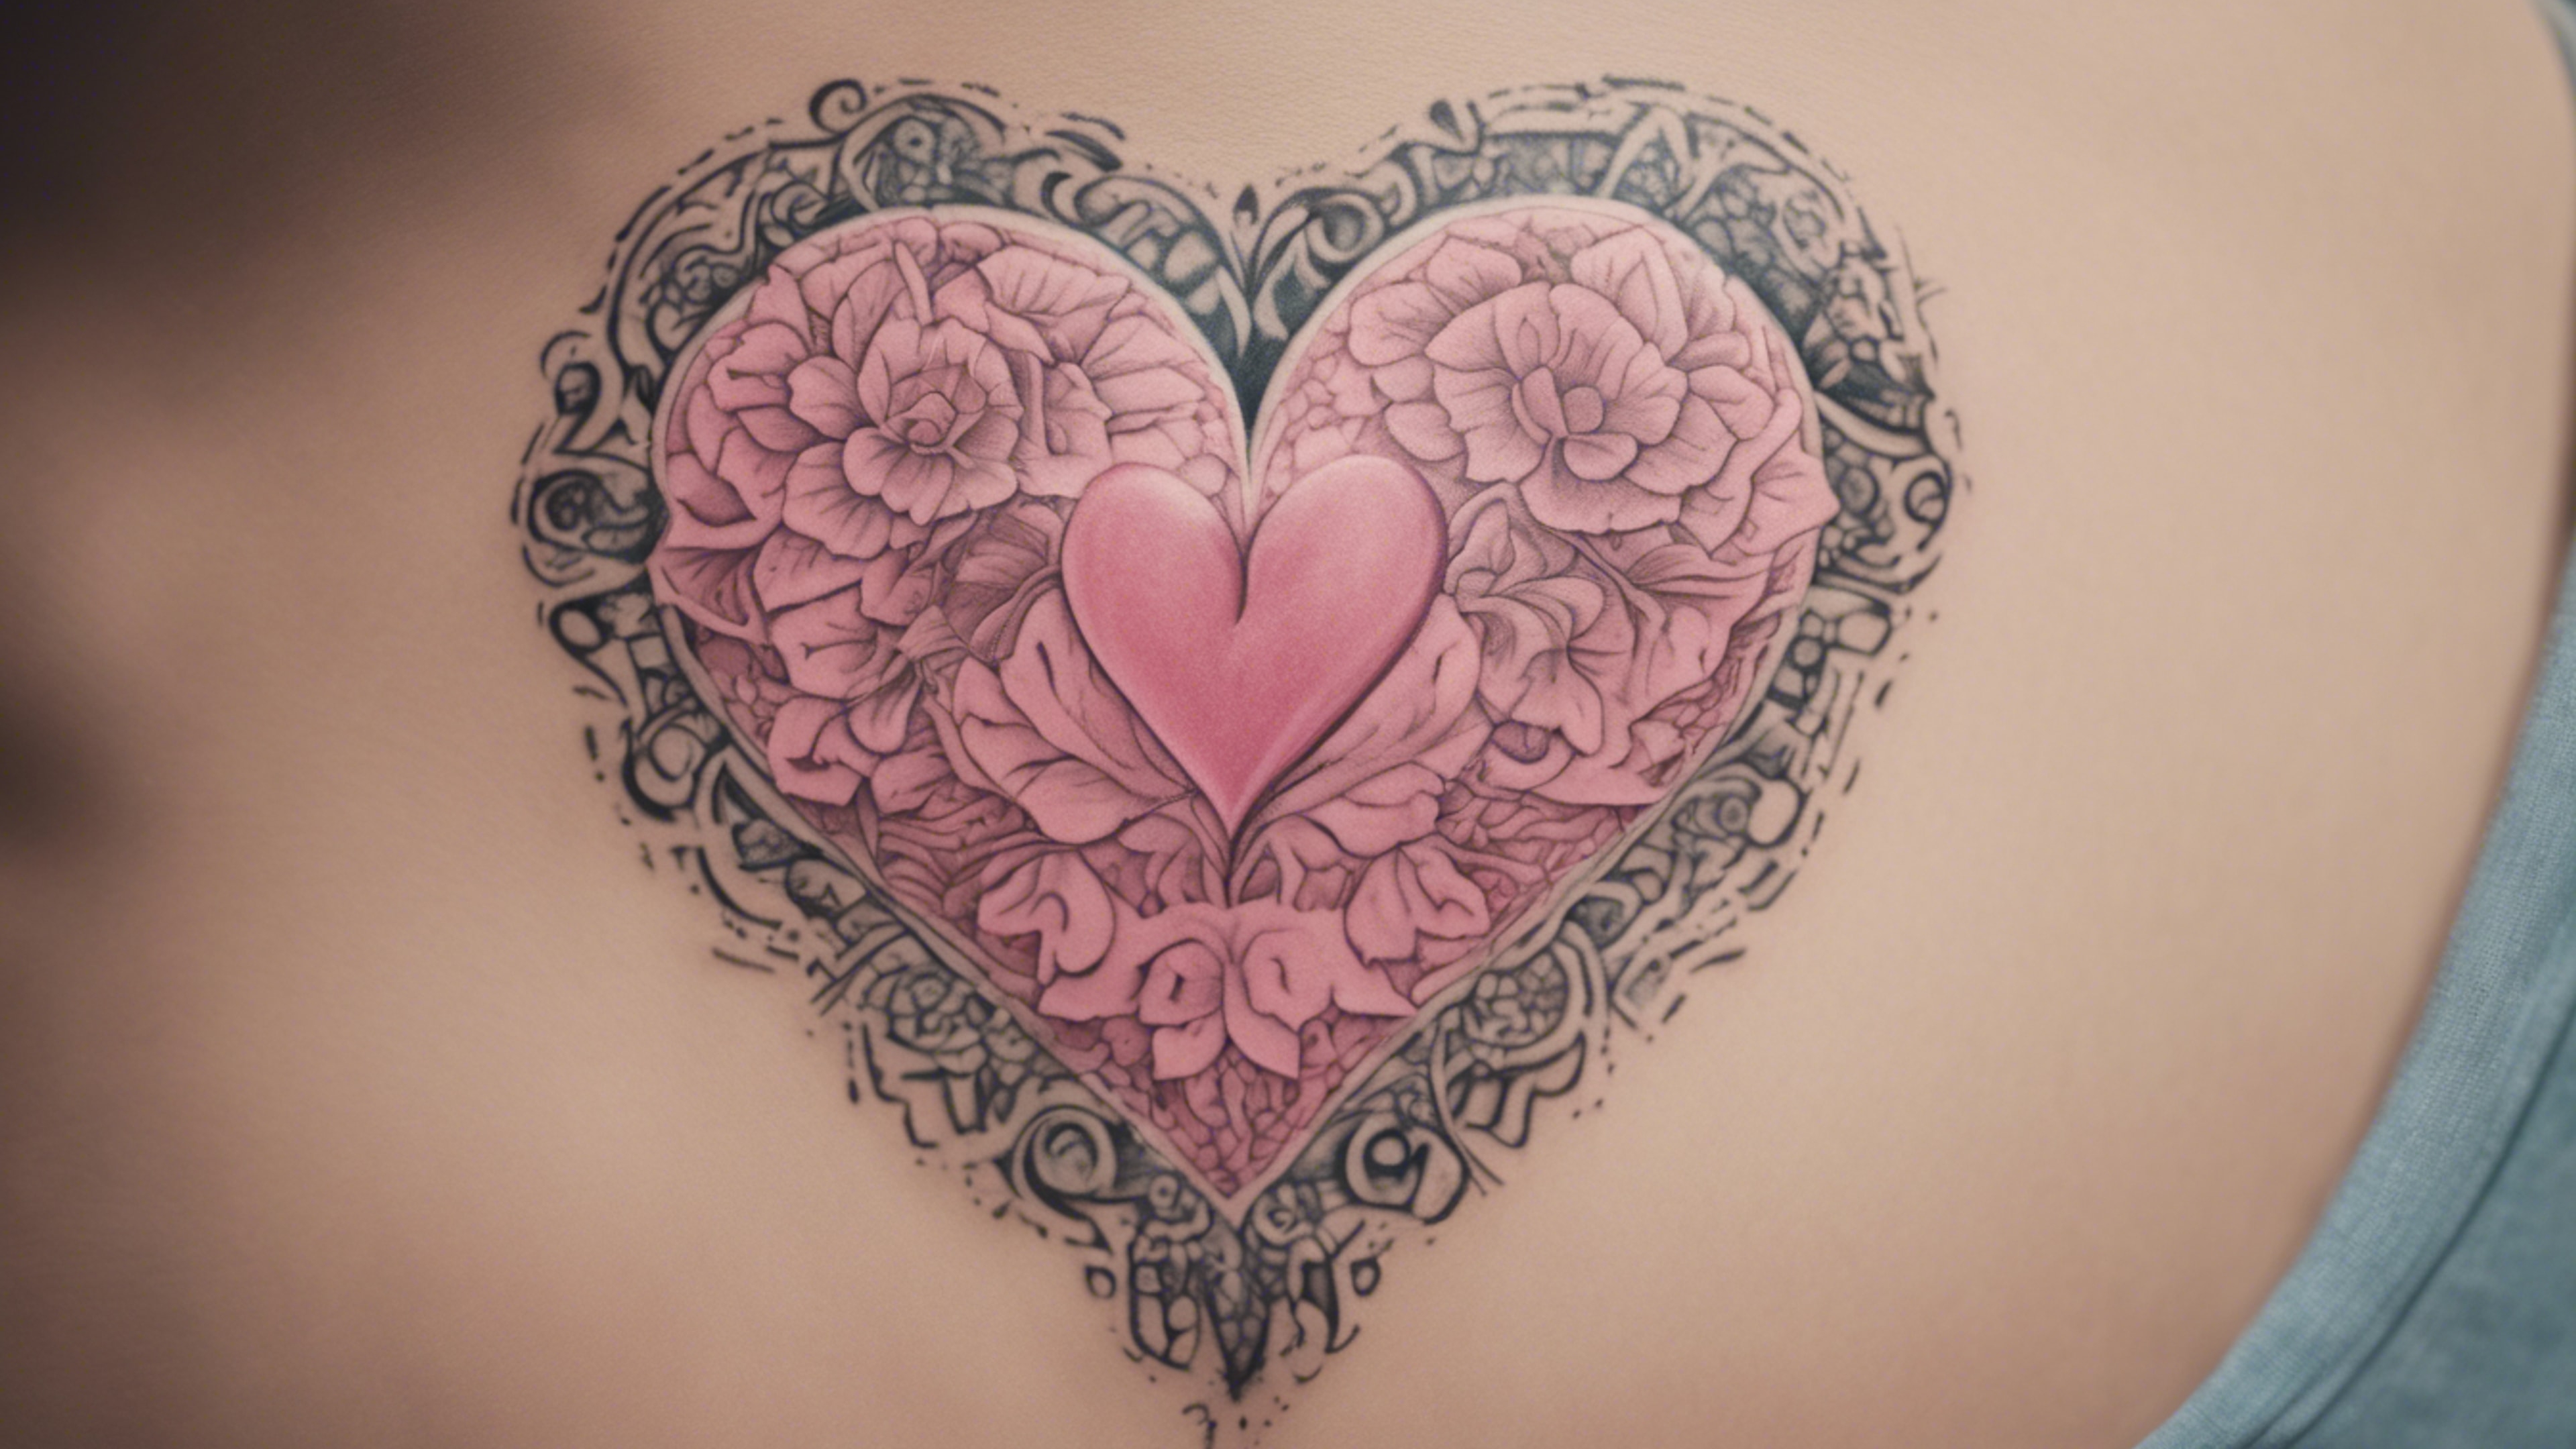 A small pink heart shaped tattoo embellished with intricate floral patterns. Papel de parede[dd23c5855ab44f40b2fe]